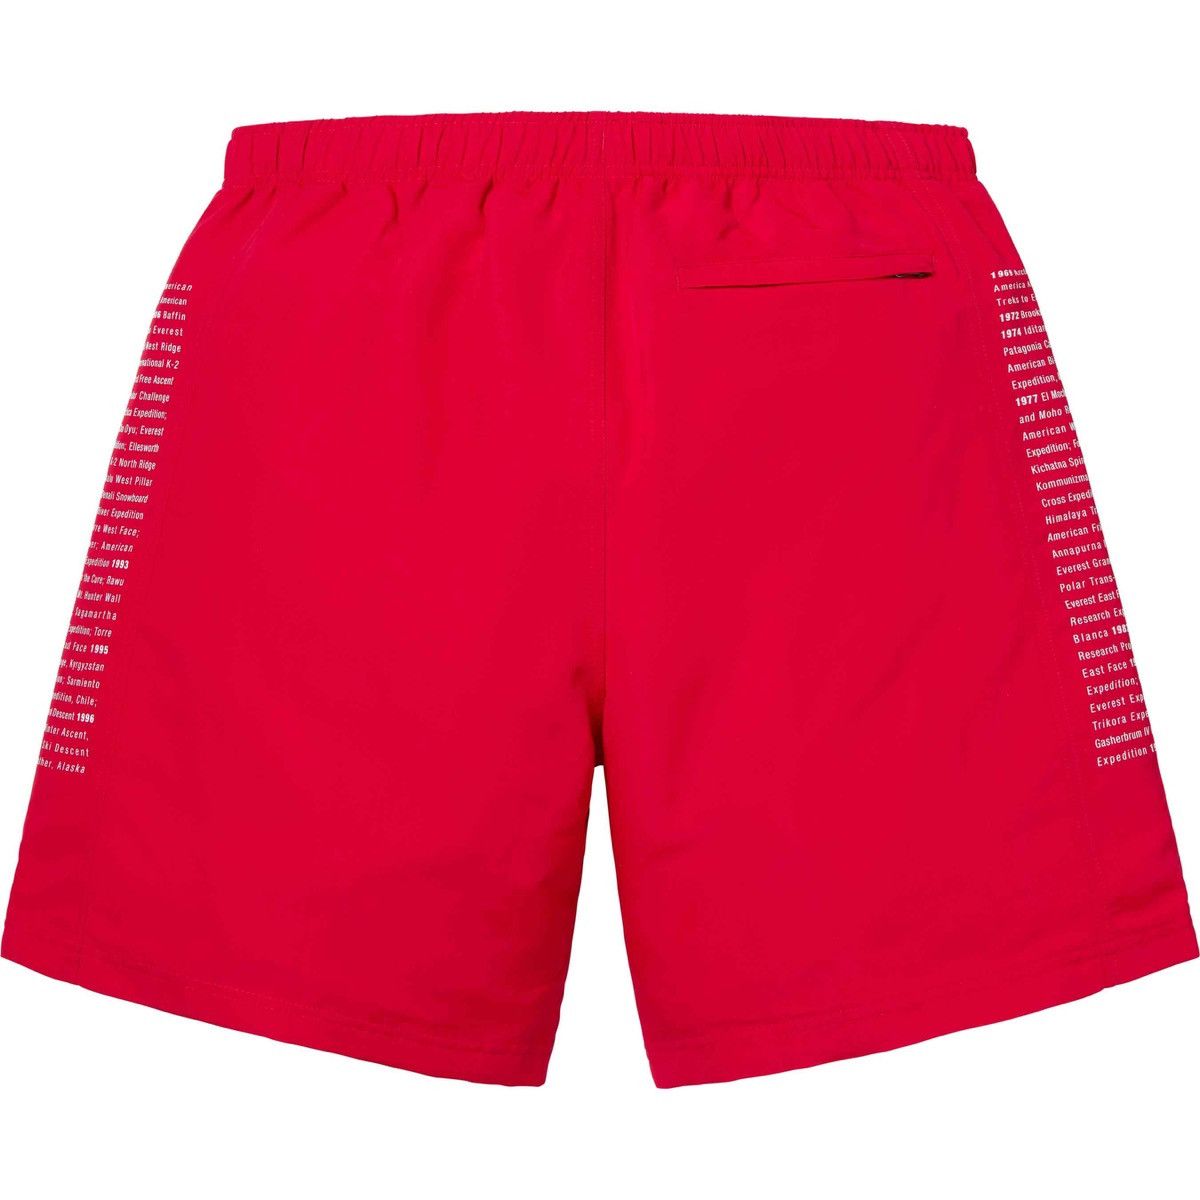 Supreme Supreme®/The North Face® Nylon Short in Red Size Large ...